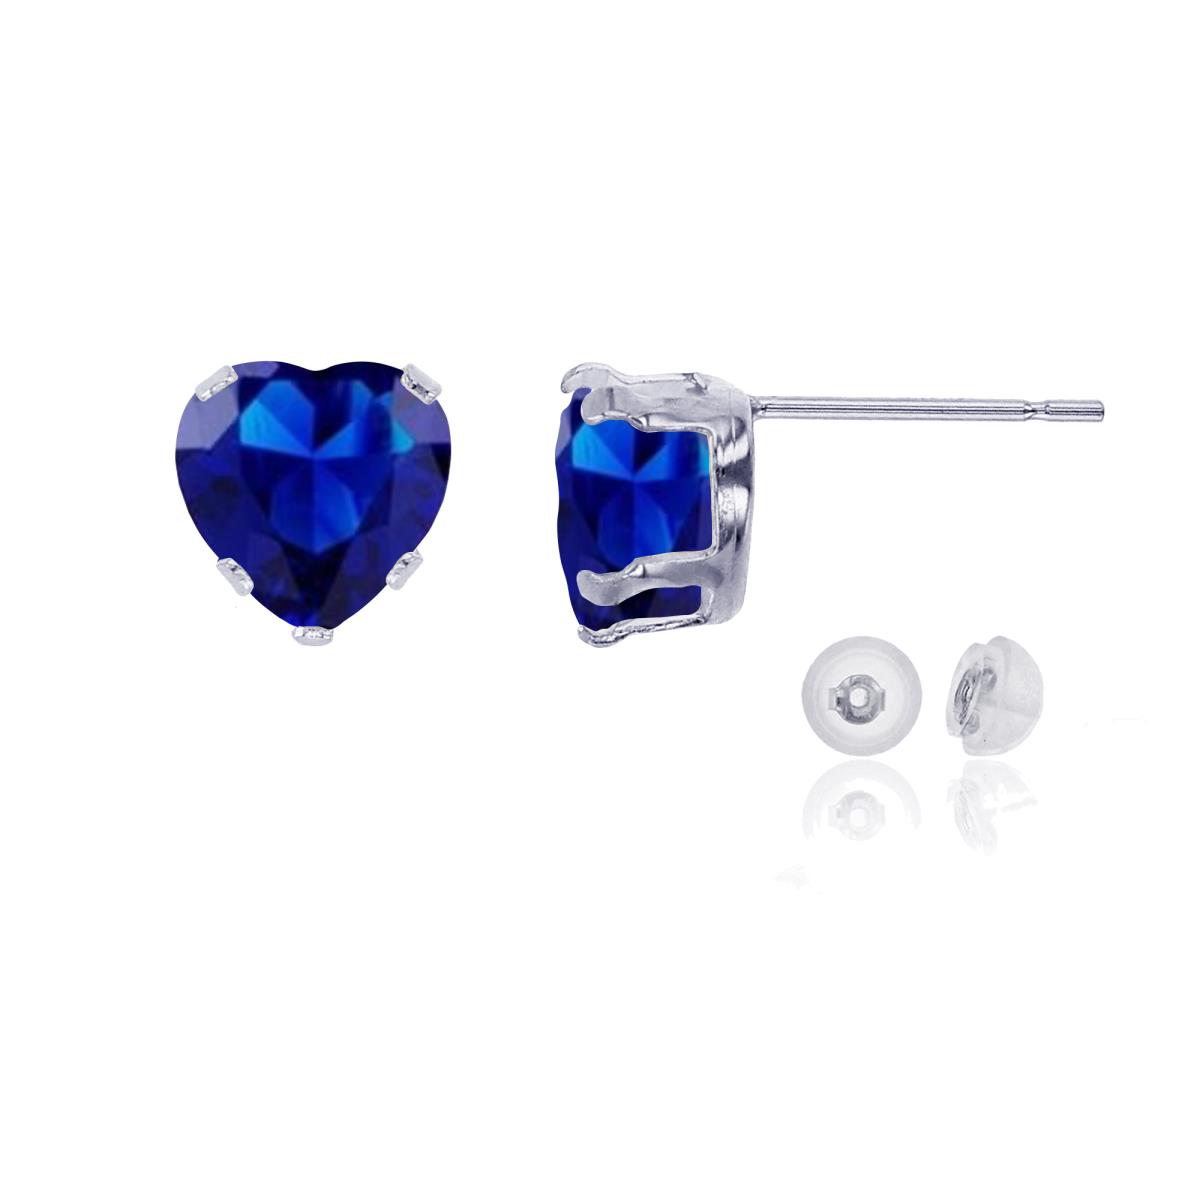 10K White Gold 6x6mm Heart Cr Blue Sapphire Stud Earring with Silicone Back